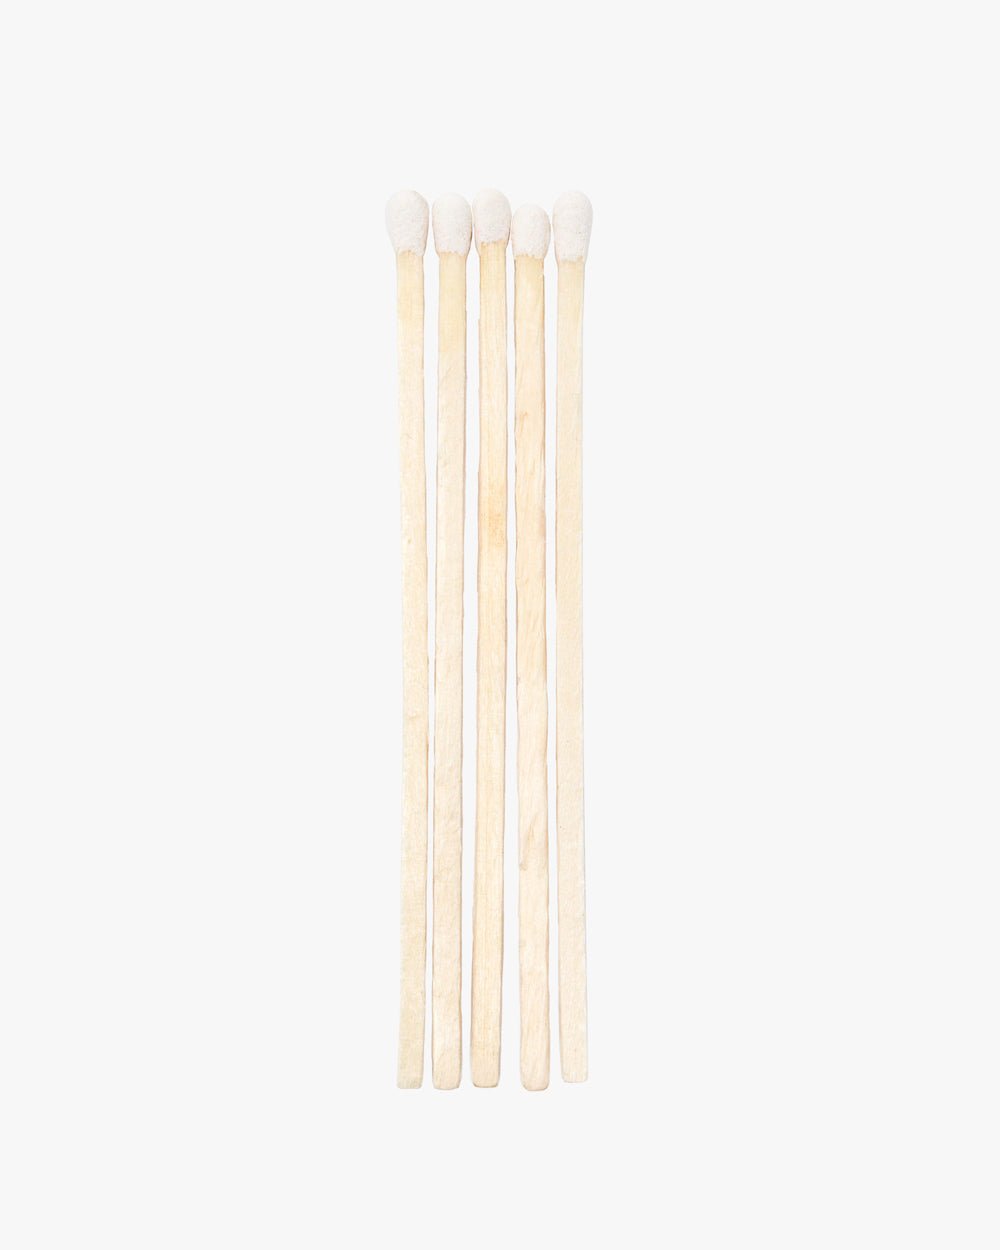 4" MATCHES REFILL - Shop Cupcakes and Cashmere